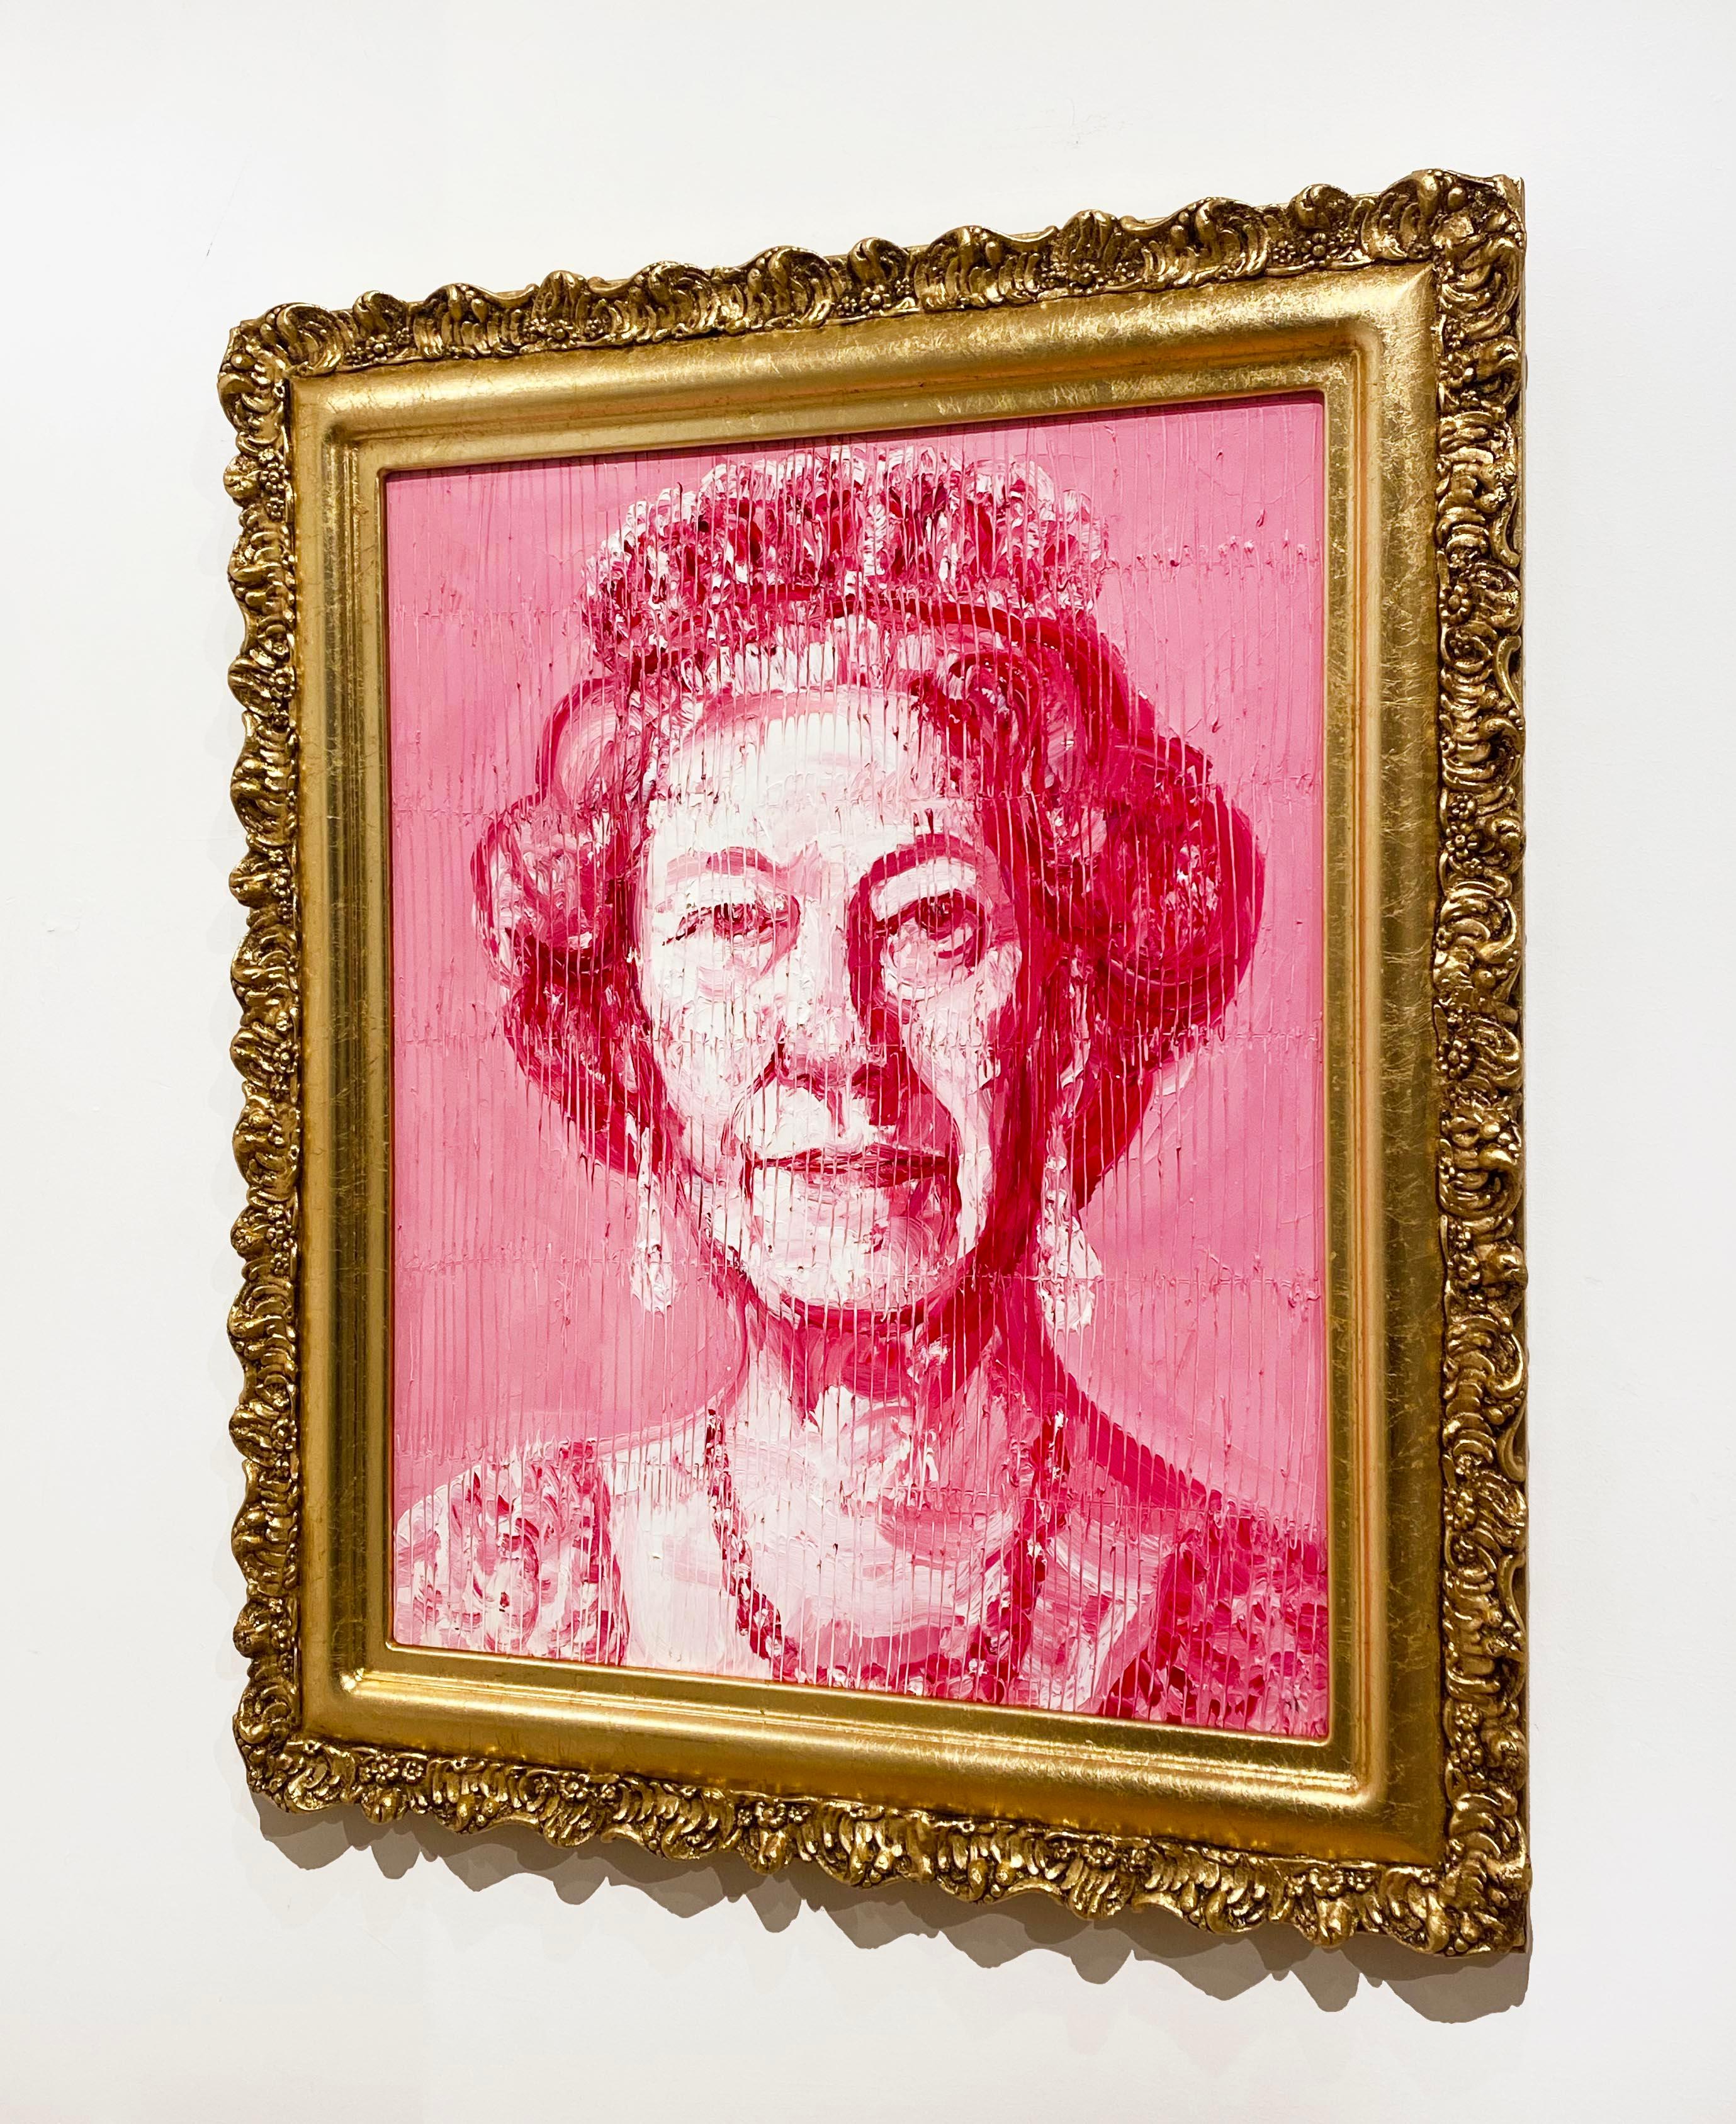 Her Majesty Queen Elizabeth - Contemporary Painting by Hunt Slonem